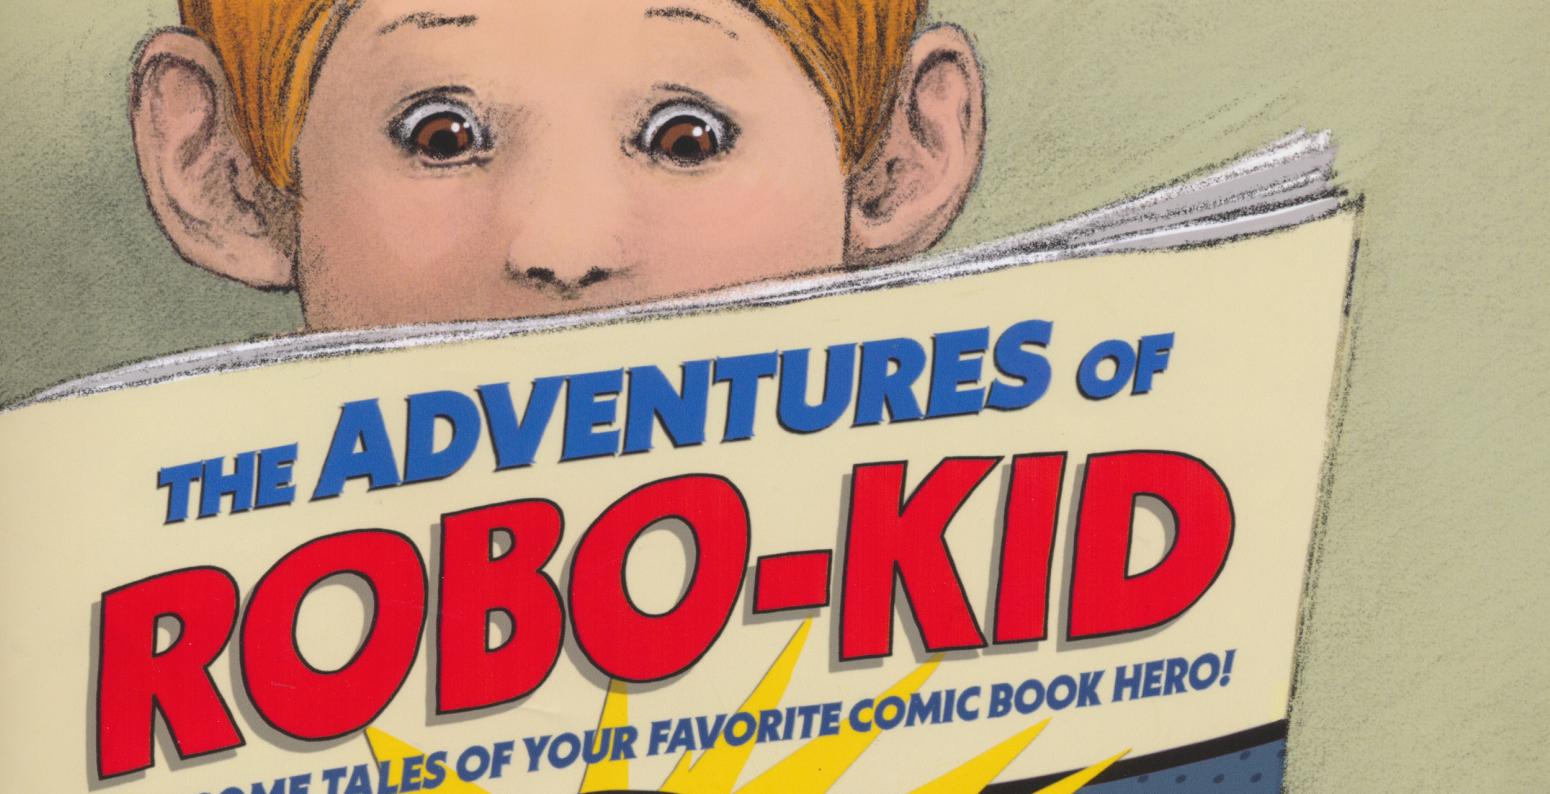 Child is reading a book with the title "The Adventures of Robo-Kid"